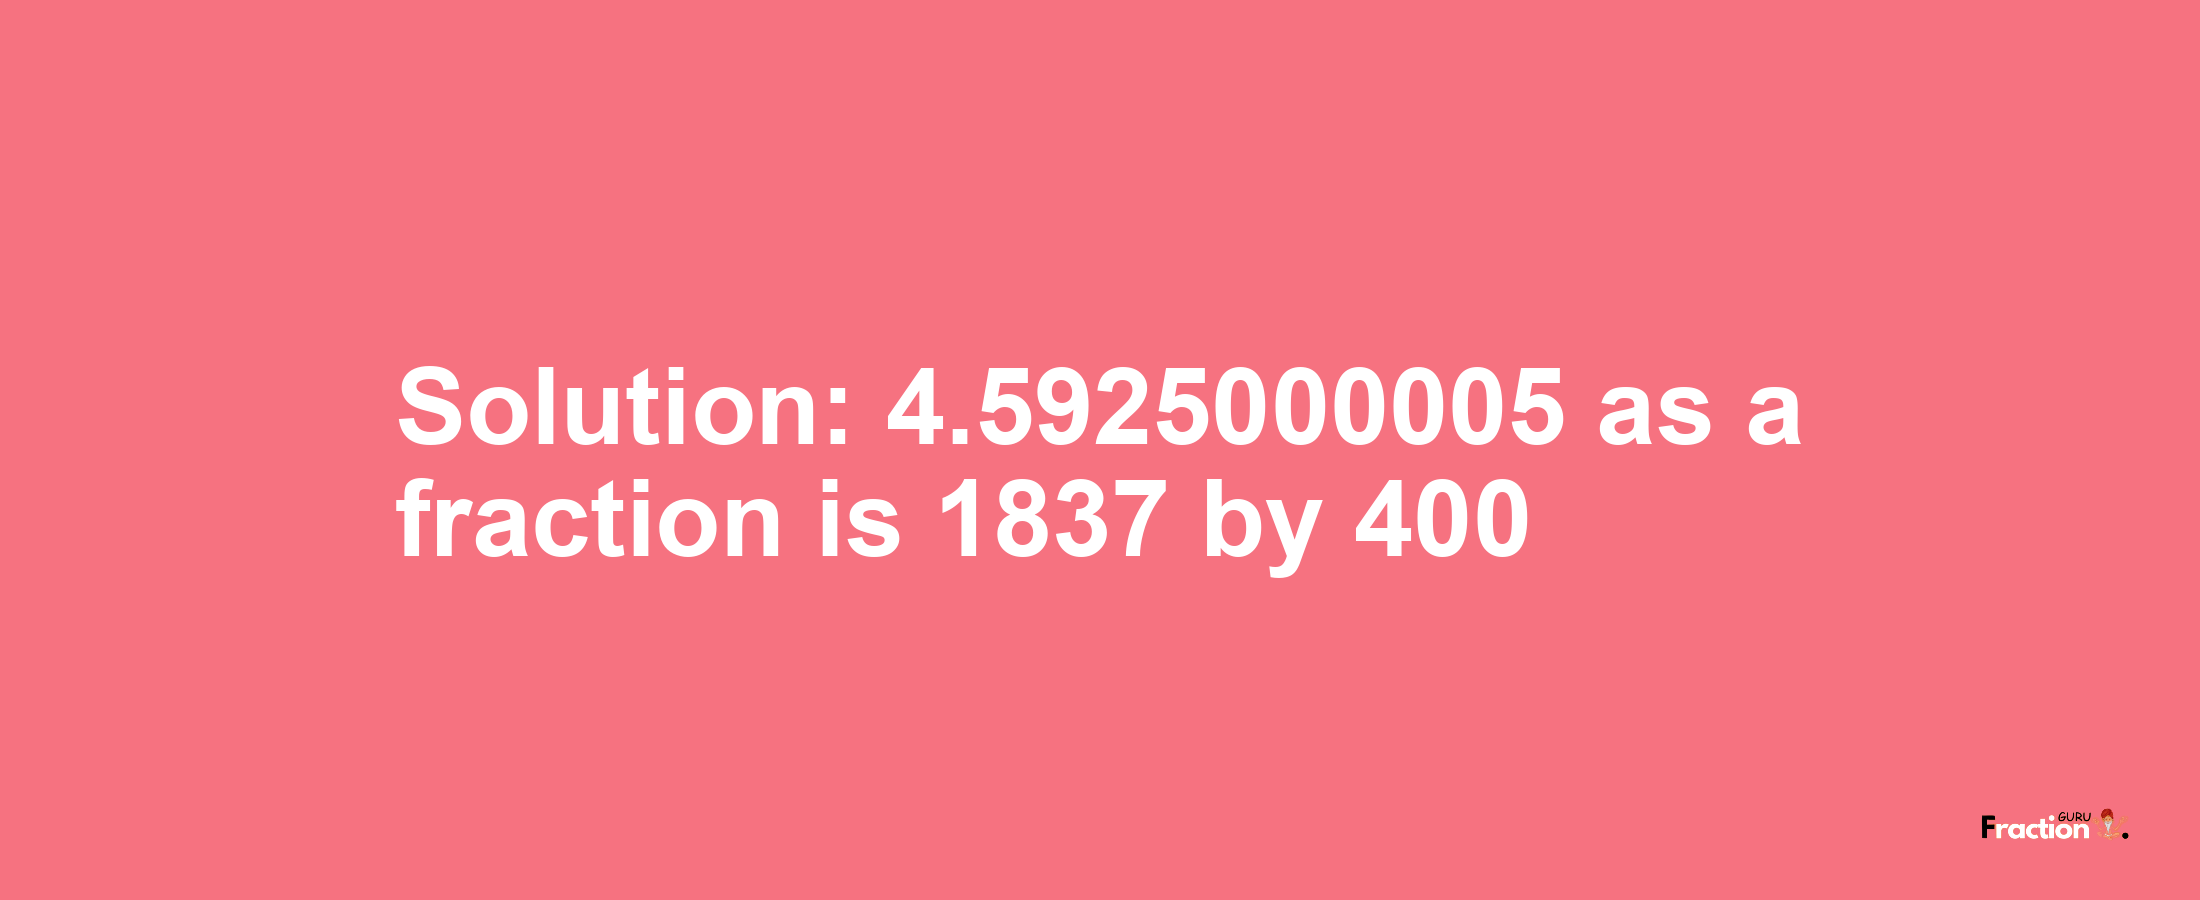 Solution:4.5925000005 as a fraction is 1837/400